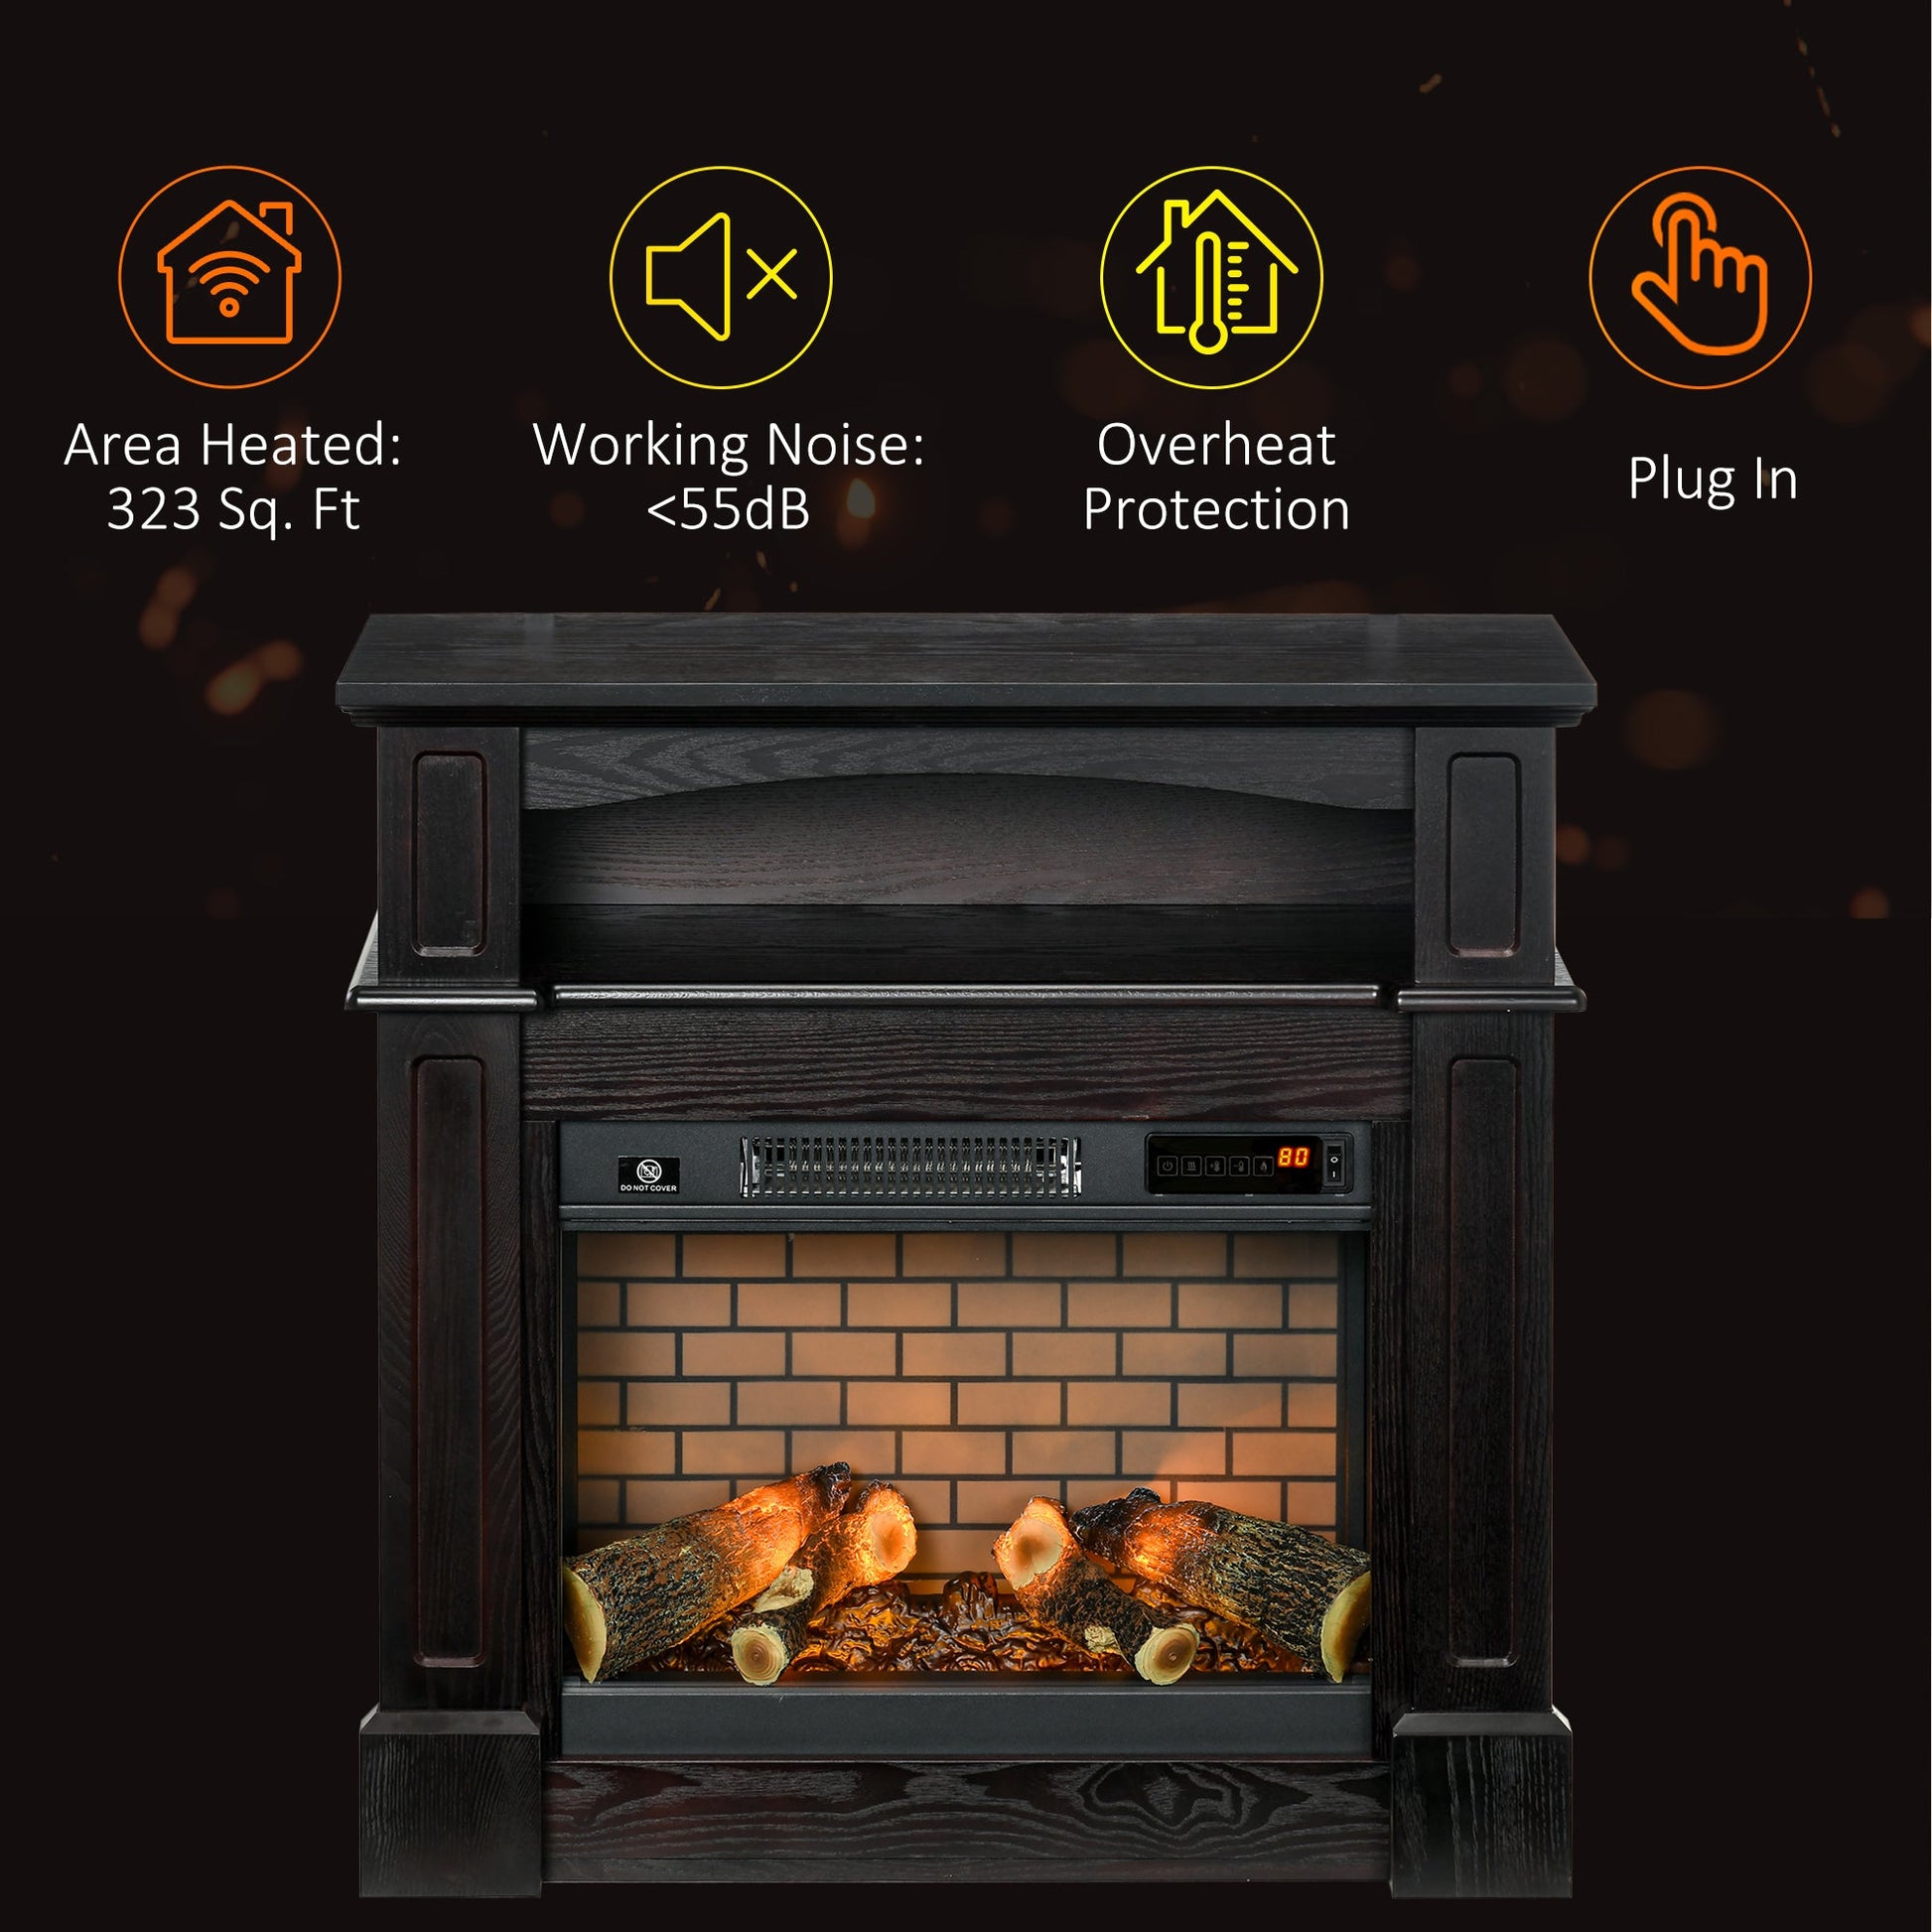 Electric Fireplace with Mantel, Freestanding Heater Corner Firebox with Remote Control, 700W/1400W, Brown - Gallery Canada